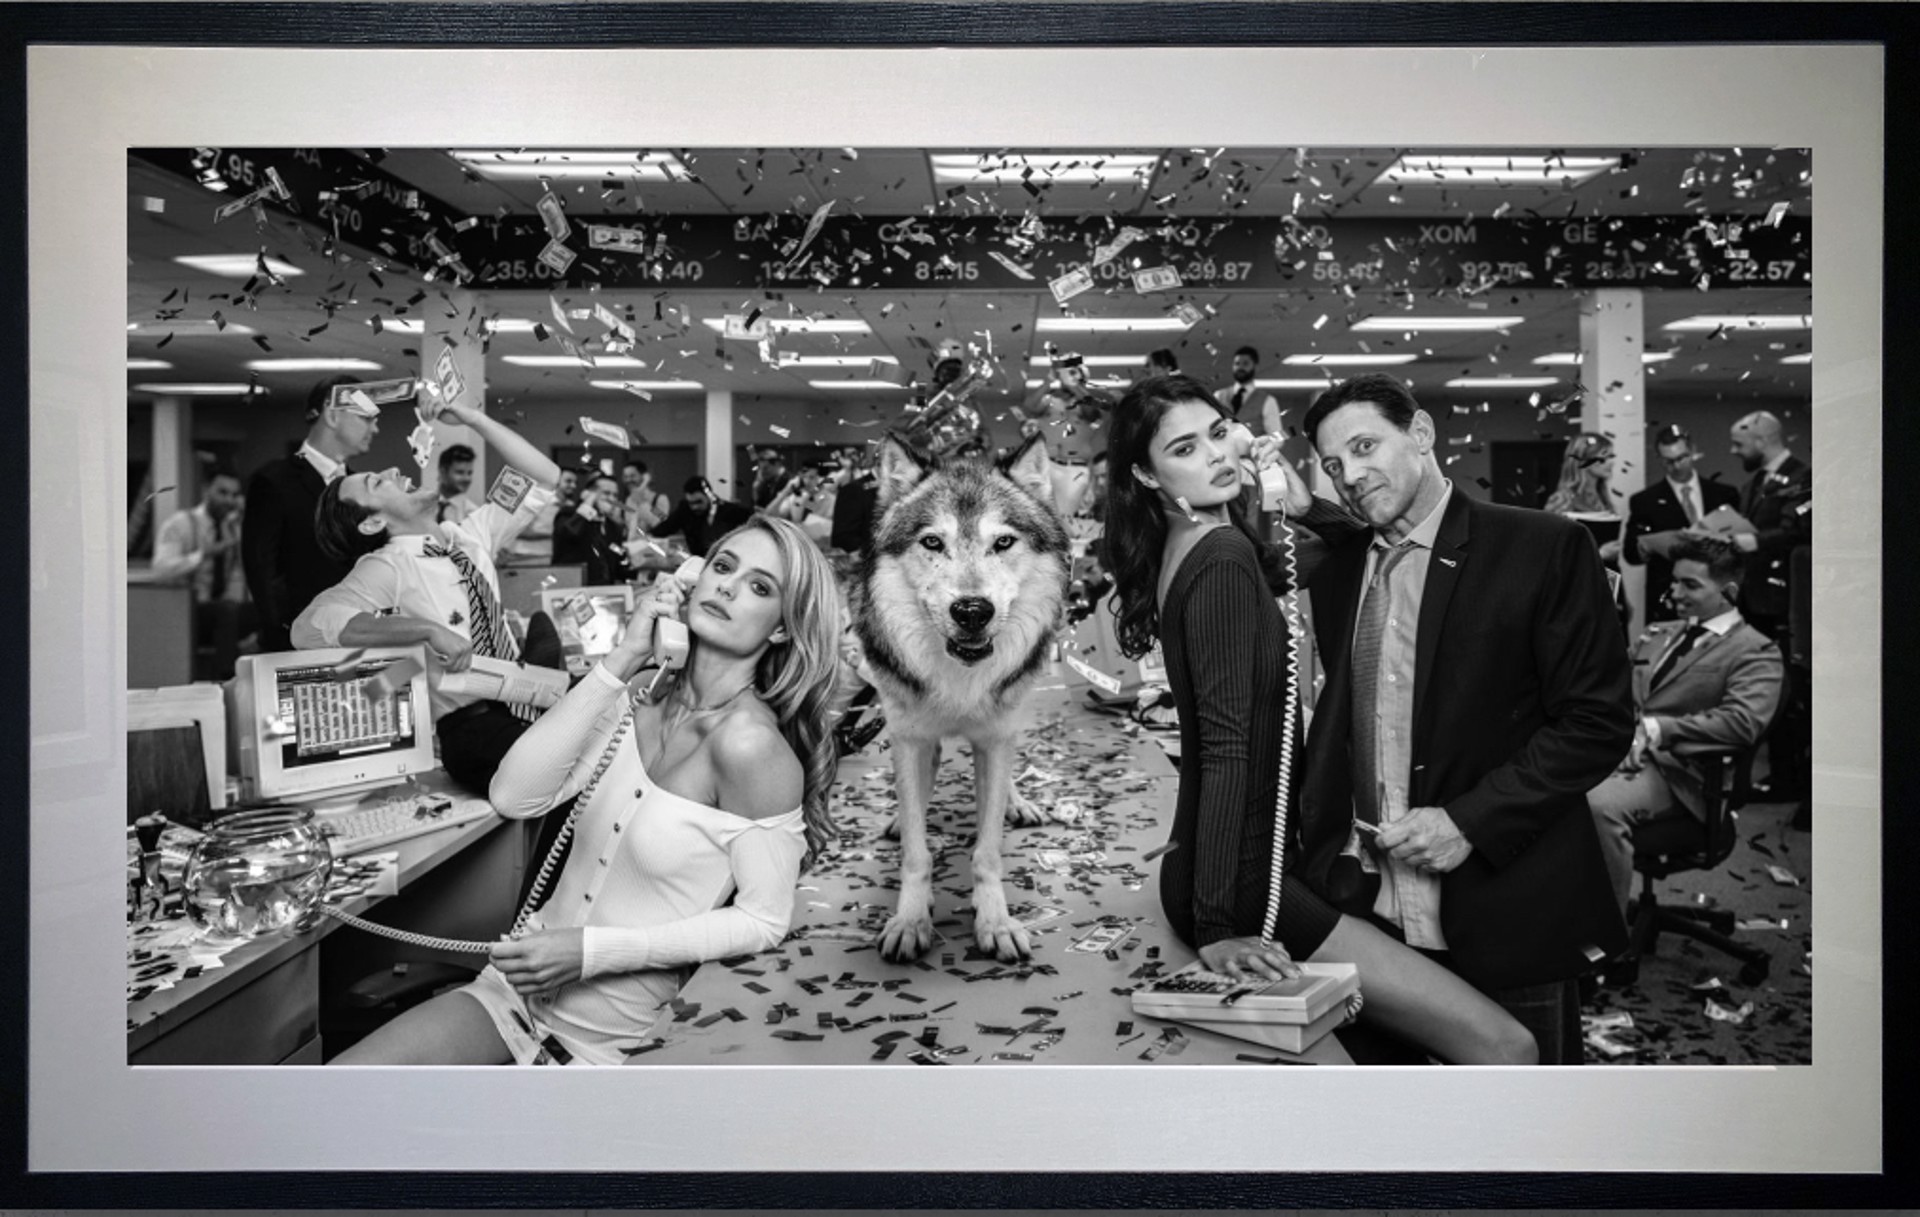 The Wolves of Wall Street 2 by David Yarrow